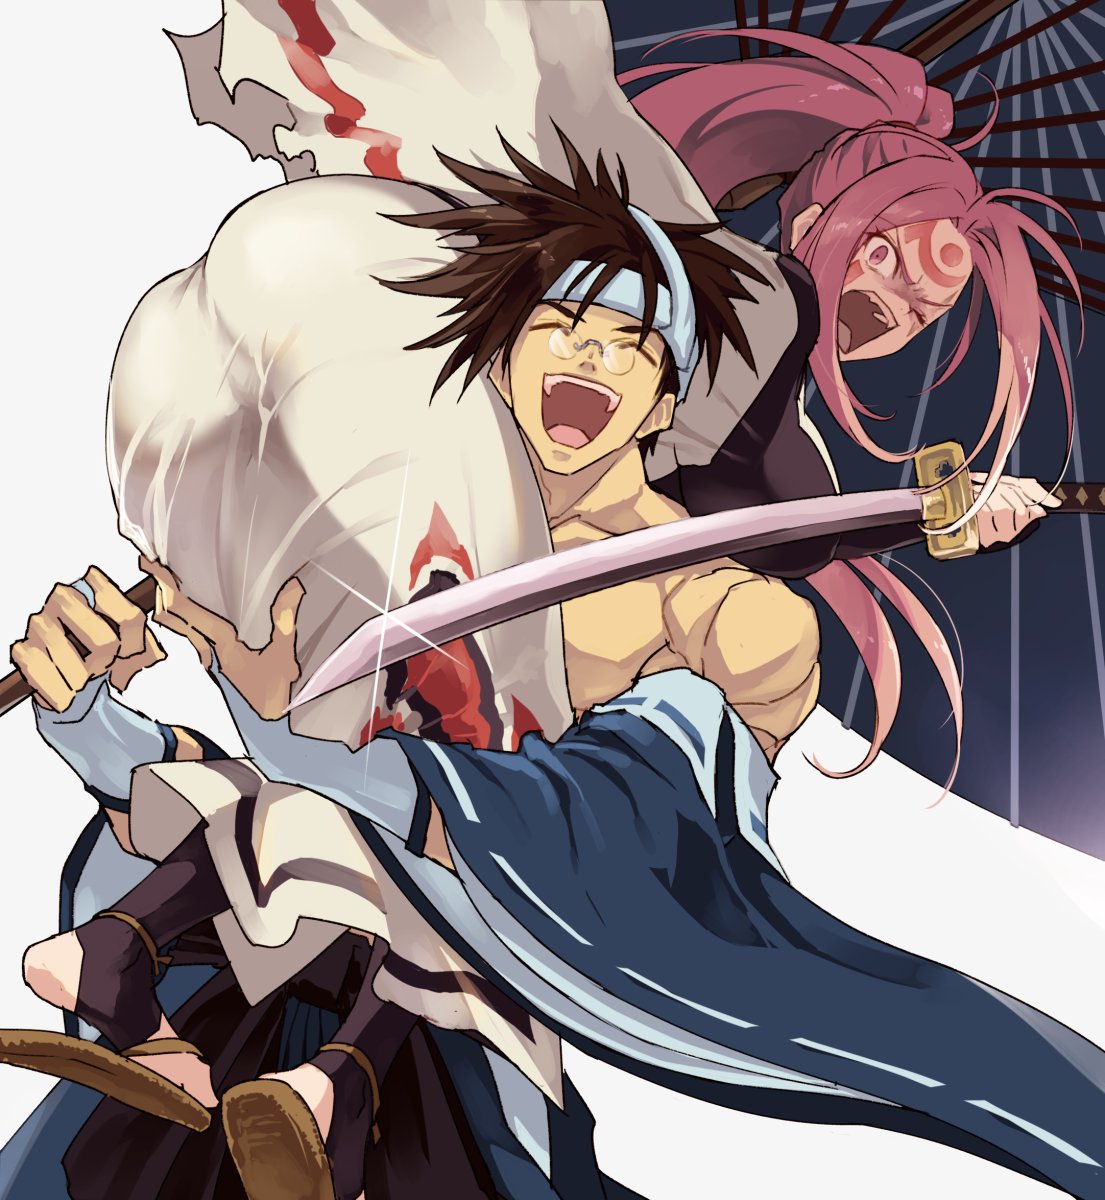 1boy 1girl ahoge amputee ass baiken bare_shoulders big_hair brown_hair carrying carrying_over_shoulder closed_eyes commentary_request facial_tattoo glasses guilty_gear guilty_gear_xrd hakama high_ponytail highres holding holding_sword holding_umbrella holding_weapon jako_(toyprn) japanese_clothes kataginu katana kimono mito_anji muscle one-eyed open_mouth over_shoulder pink_hair ponytail red_eyes scar scar_across_eye sidelocks slippers spiky_hair sword tattoo umbrella weapon